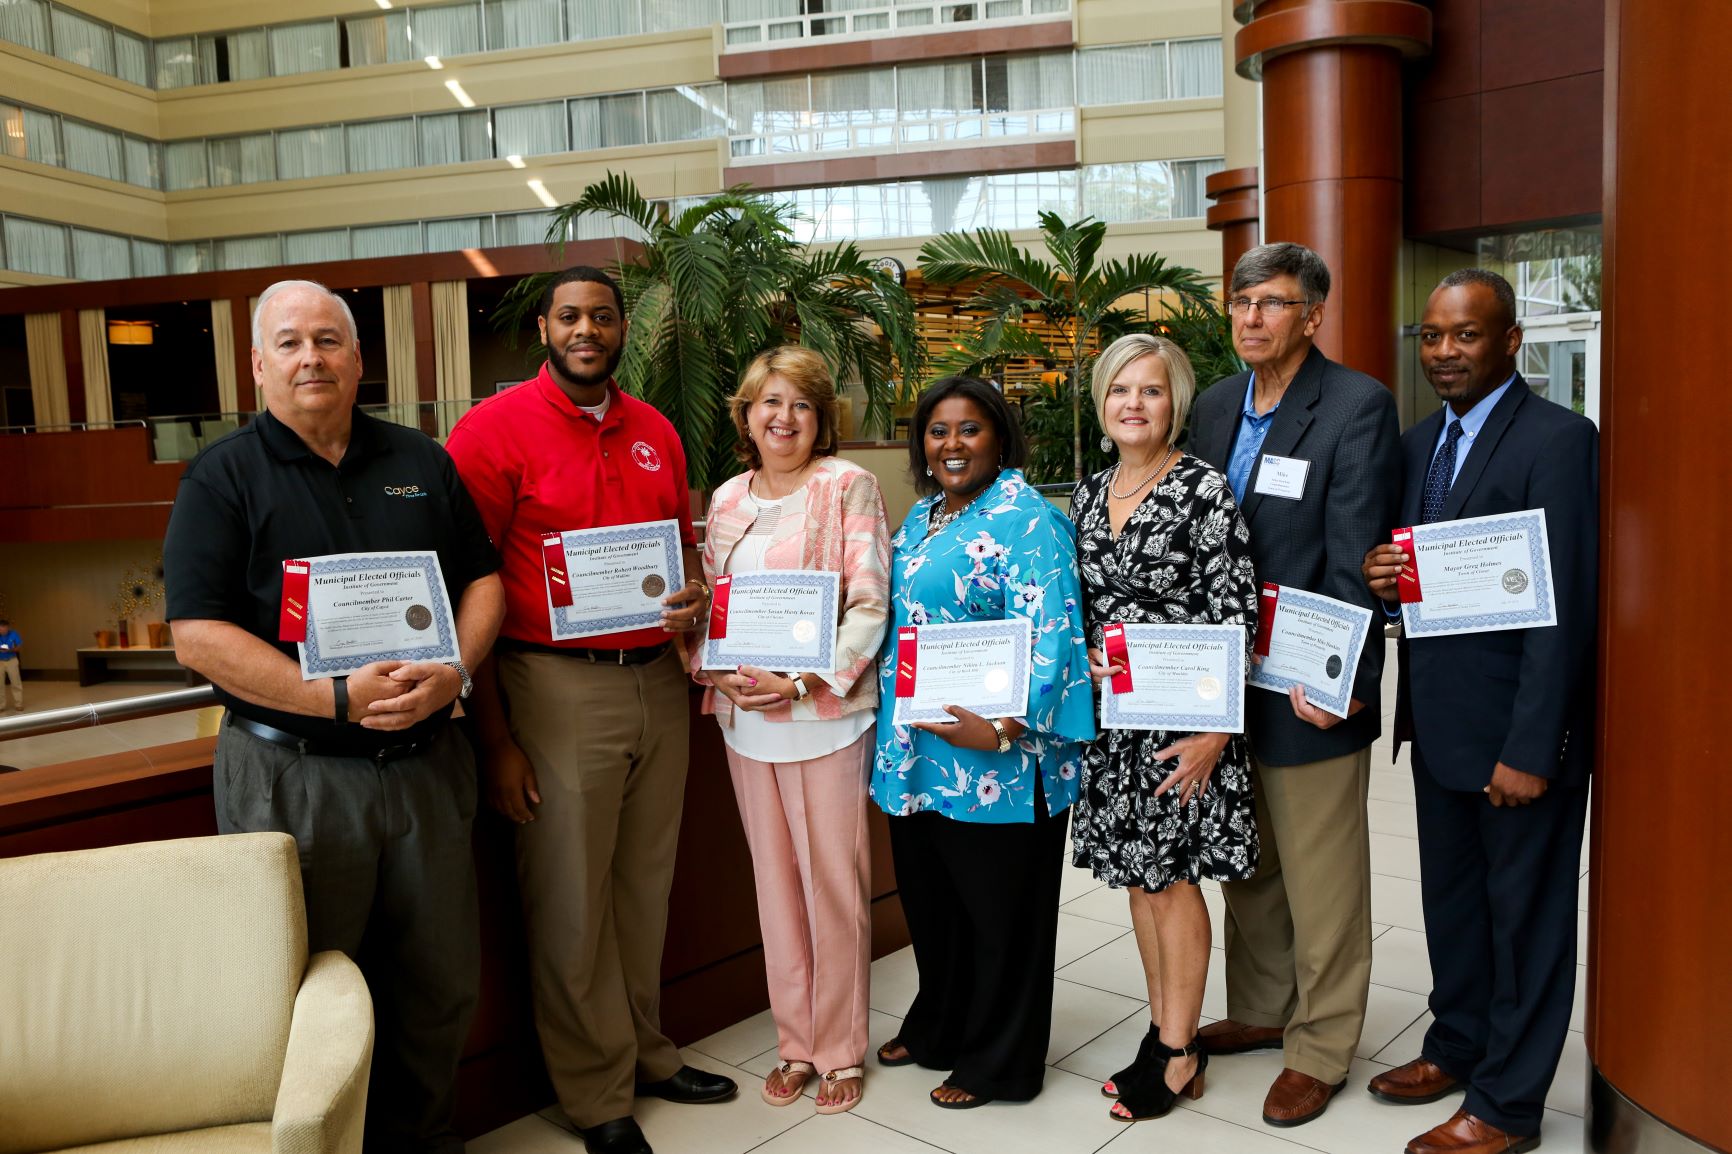 Summer 2019 graduates of the Municipal Elected Officials Institute of Government